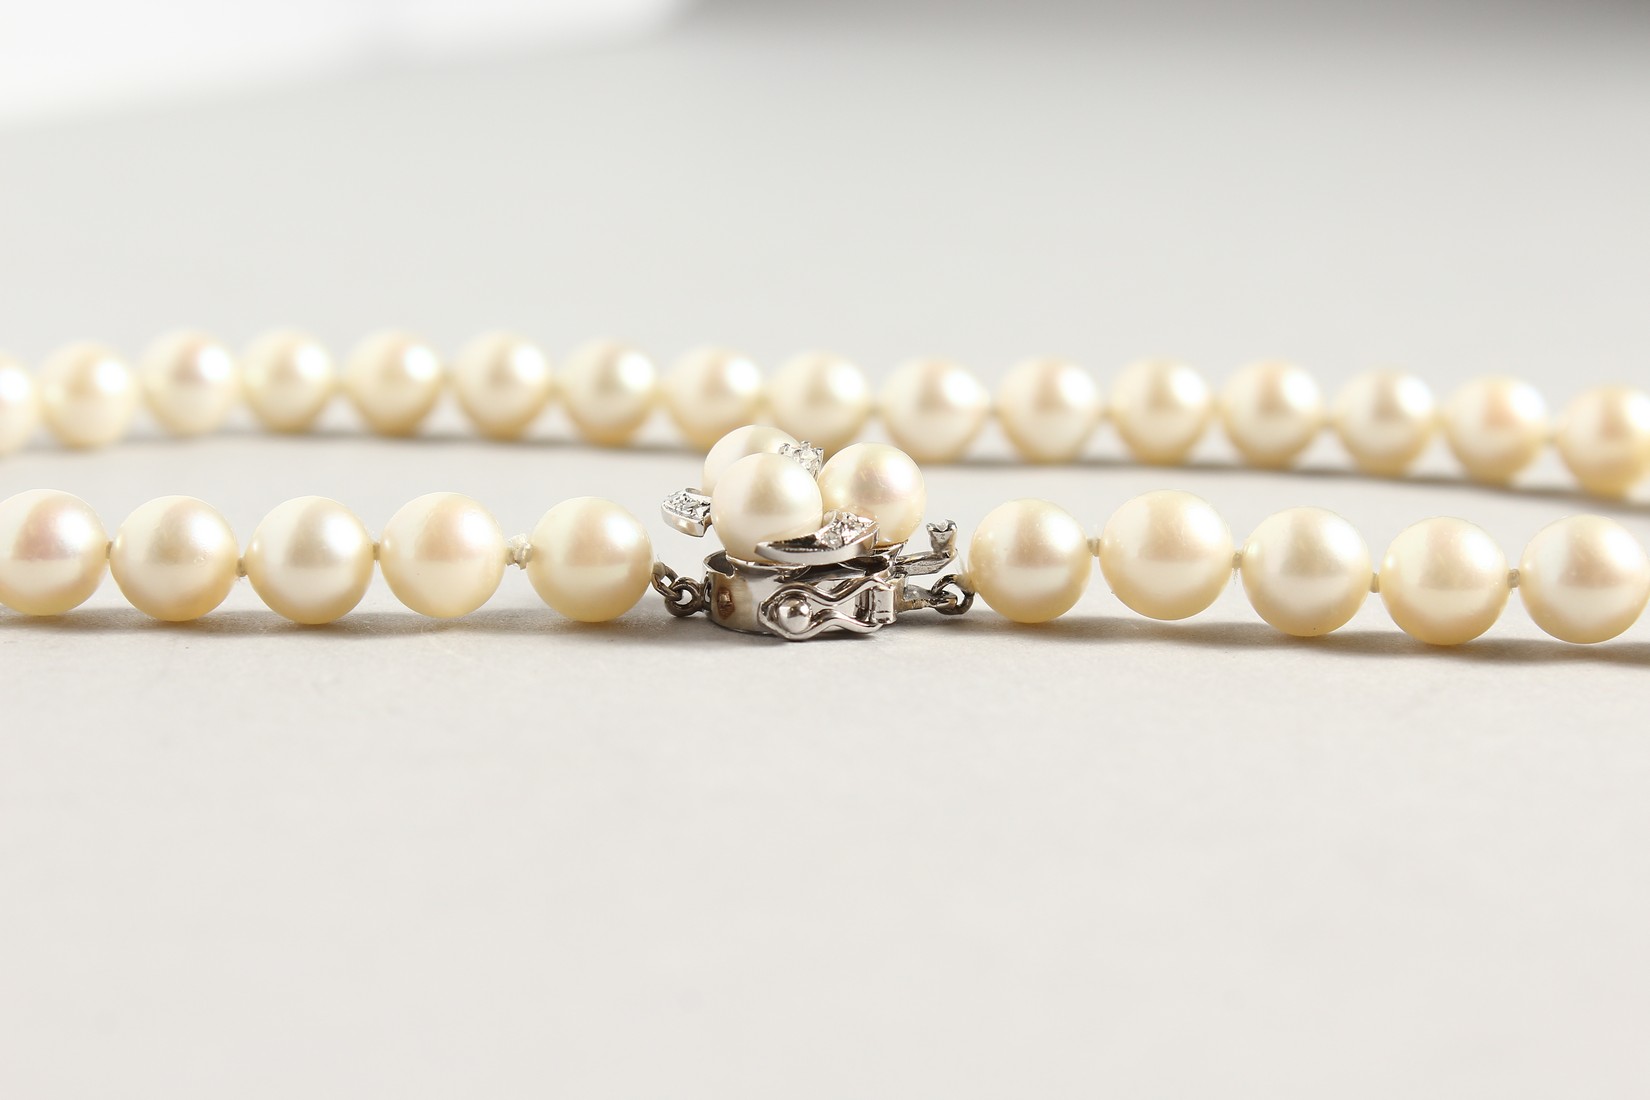 A 14CT GOLD DIAMOND AND PEARL CHOKER - Image 3 of 4